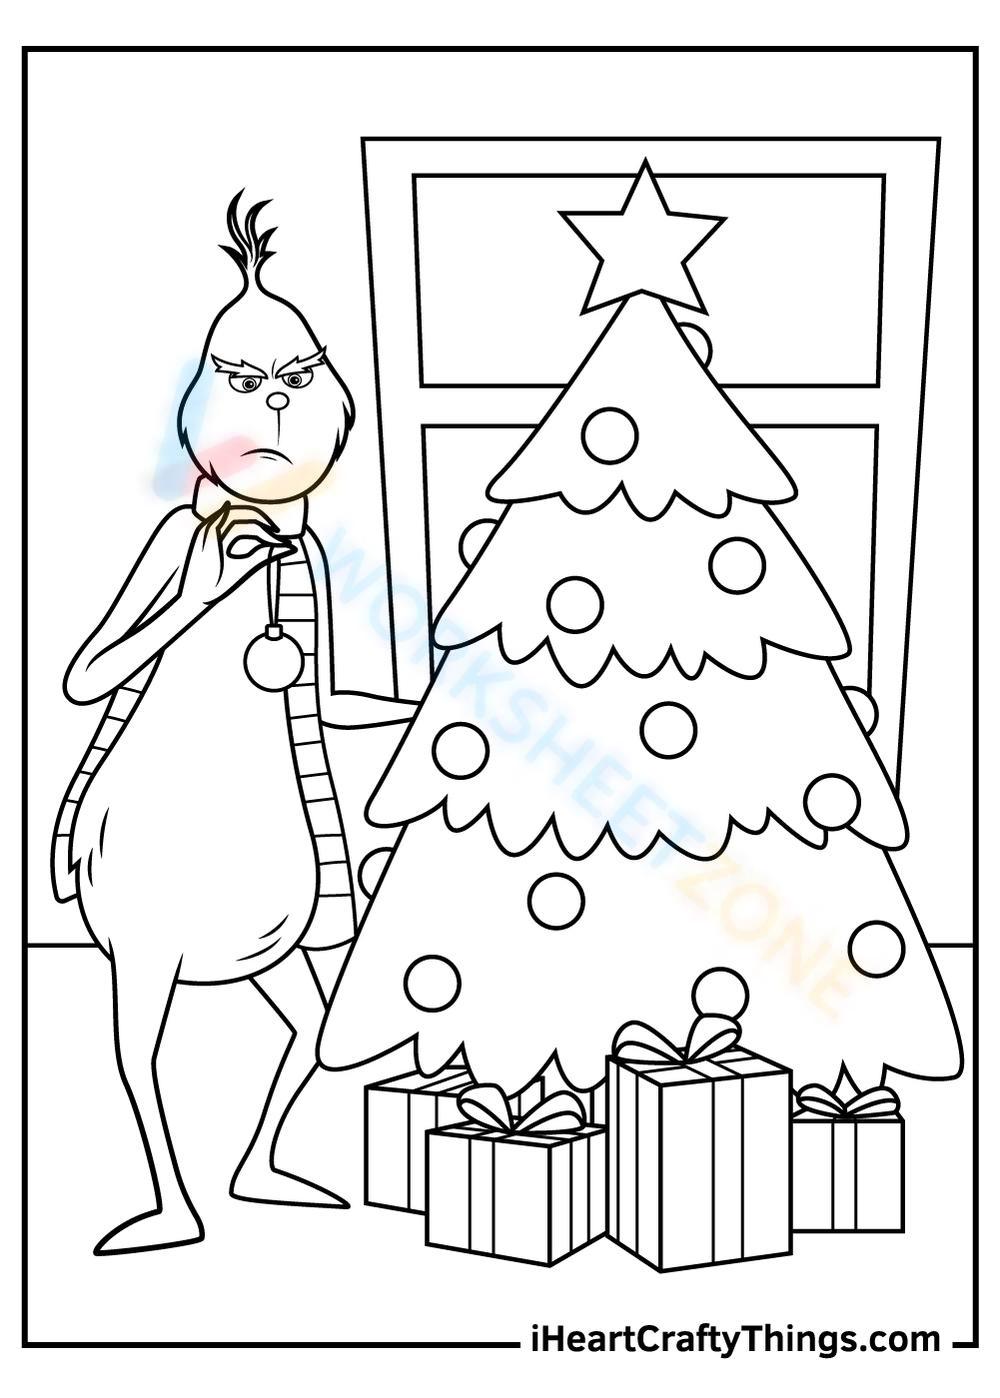 Free printable grinch coloring pages for kids